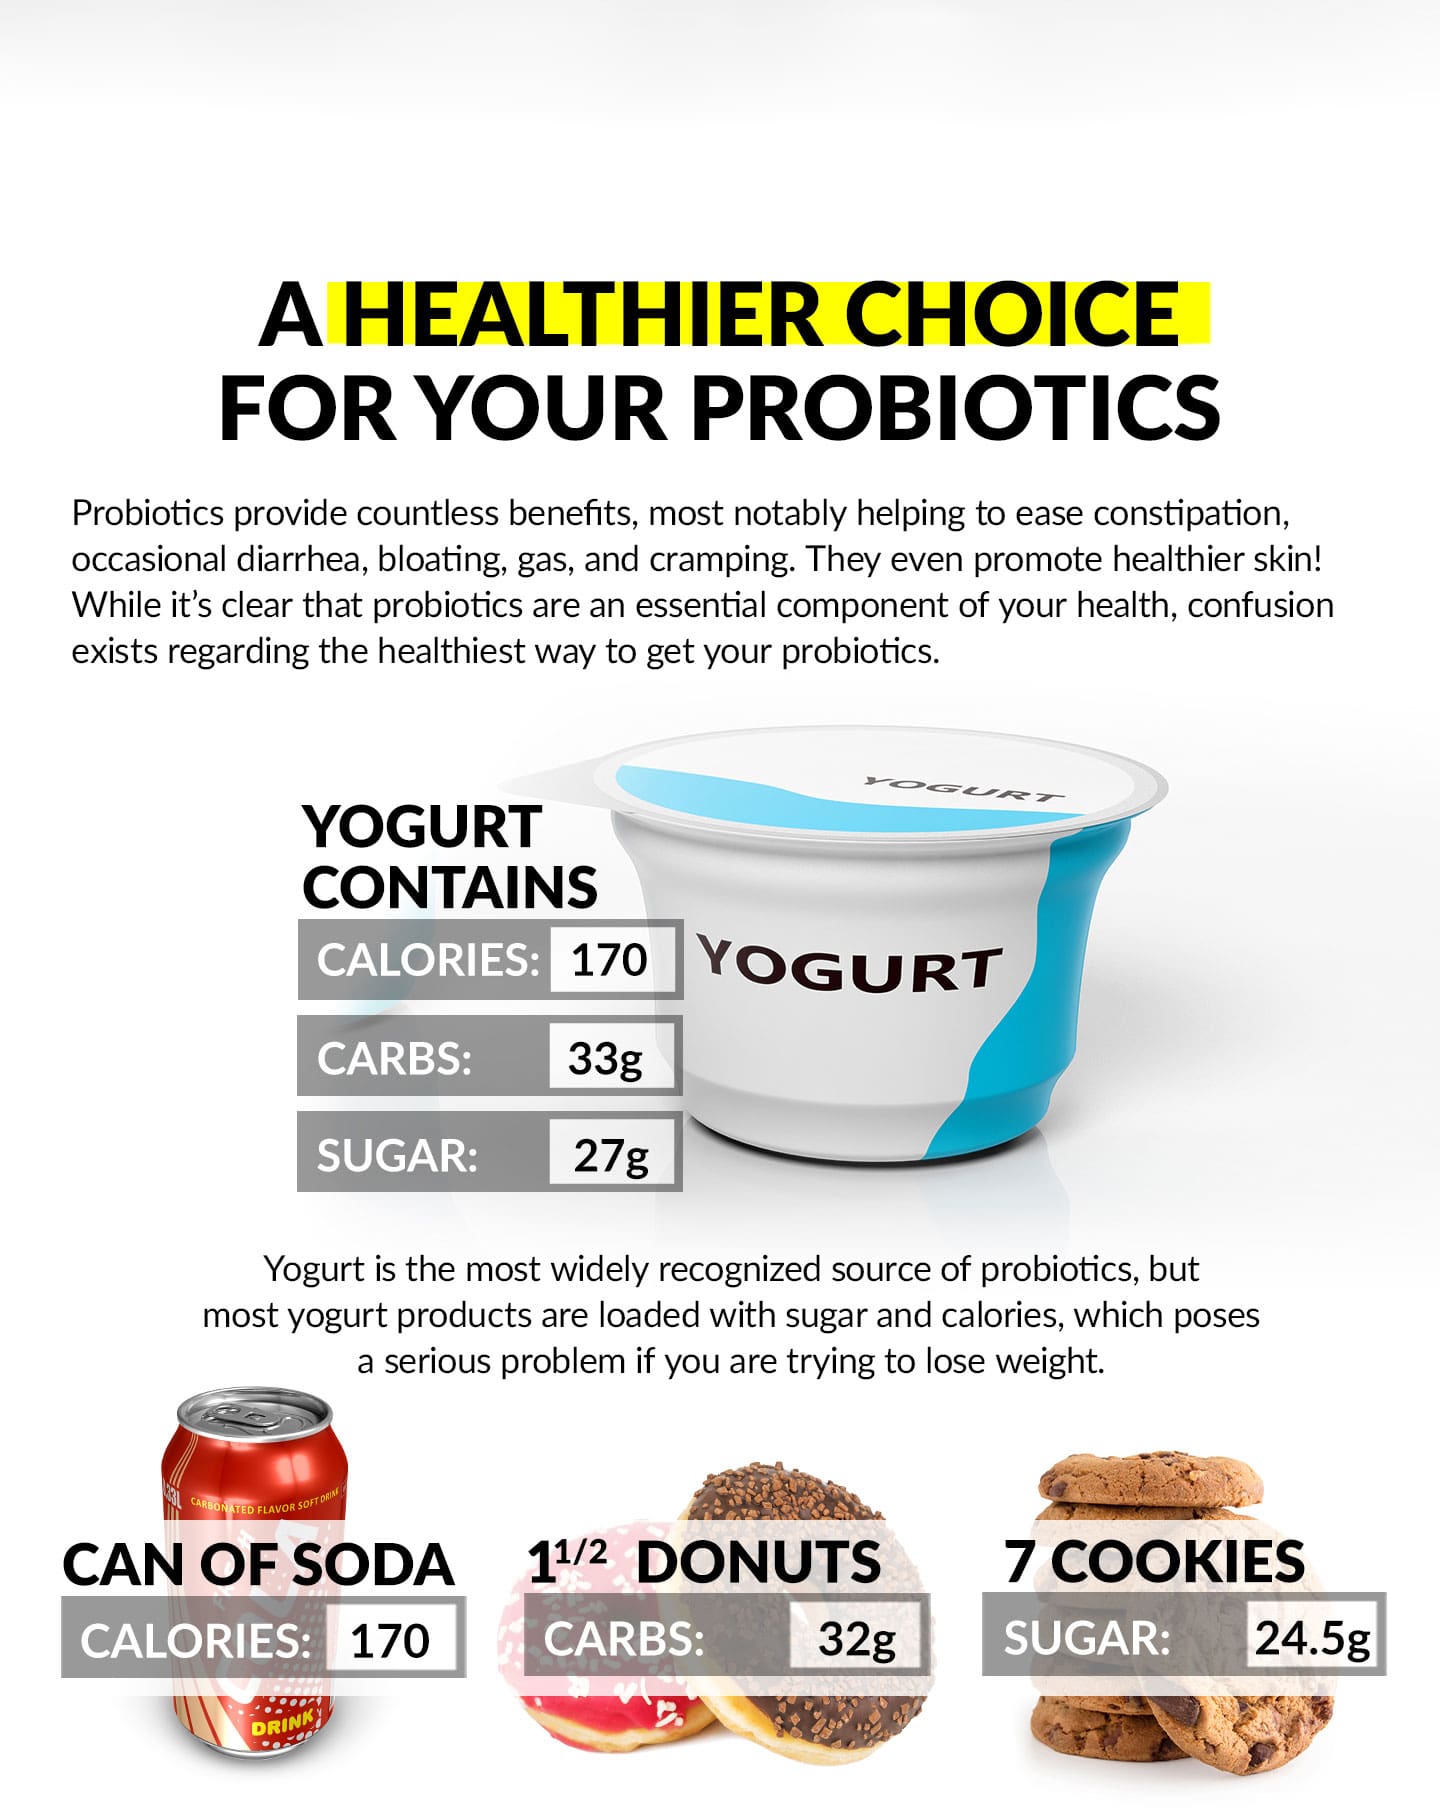 A HEALTHIER CHOICE FOR YOUR PROBIOTICS. Probiotics provide countless benefits, most notably helping to ease constipation, occasional diarrhea, bloating, gas, and cramping. They even promote healthier skin! While it’s clear that probiotics are an essential component of your health, confusion exists regarding the healthiest way to get your probiotics. YOGURT CONTAINS: Calories: 170, Carbs: 33g, Sugar: 27g. Yogurt is the most widely recognized source of probiotics, but most yogurt products are loaded with sugar and calories, which poses a serious problem if you are trying to lose weight. Can of Soda, Calories: 140. 1 ½ Donuts, Carbs: 32g. 7 Cookies, Sugar: 24.5g